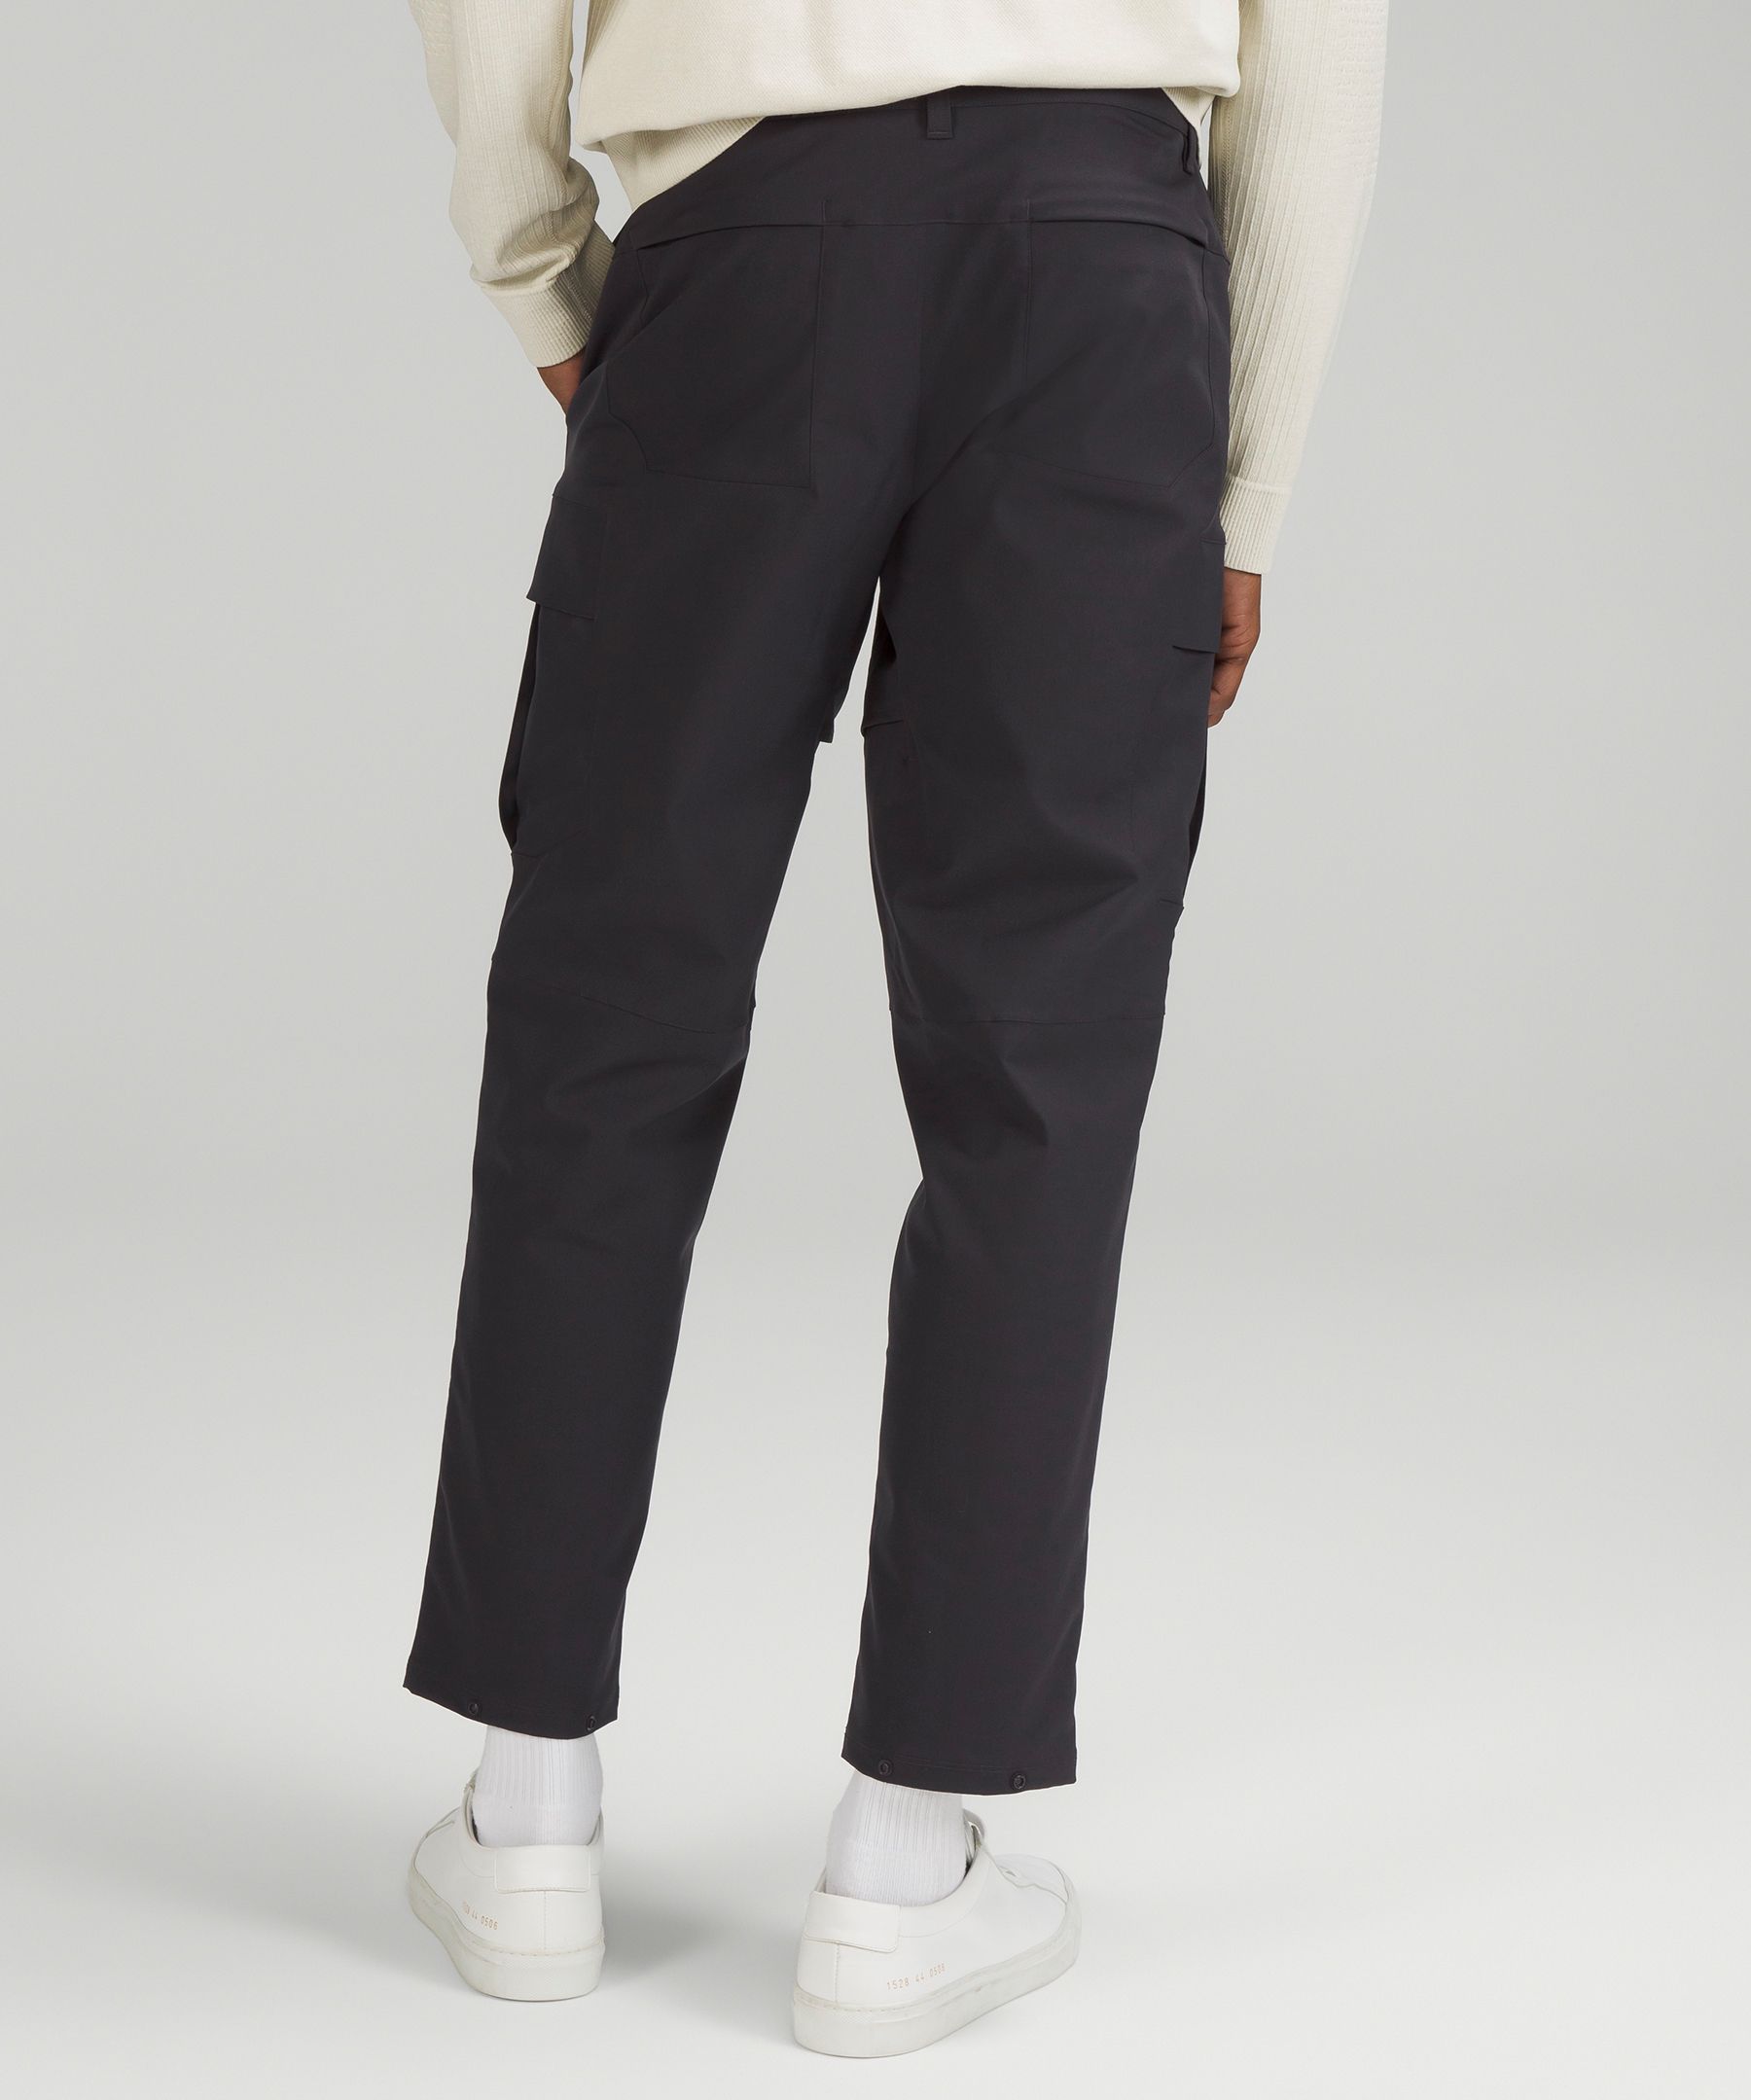 The Utilitarian Pant | Men's Pants | Outerknown